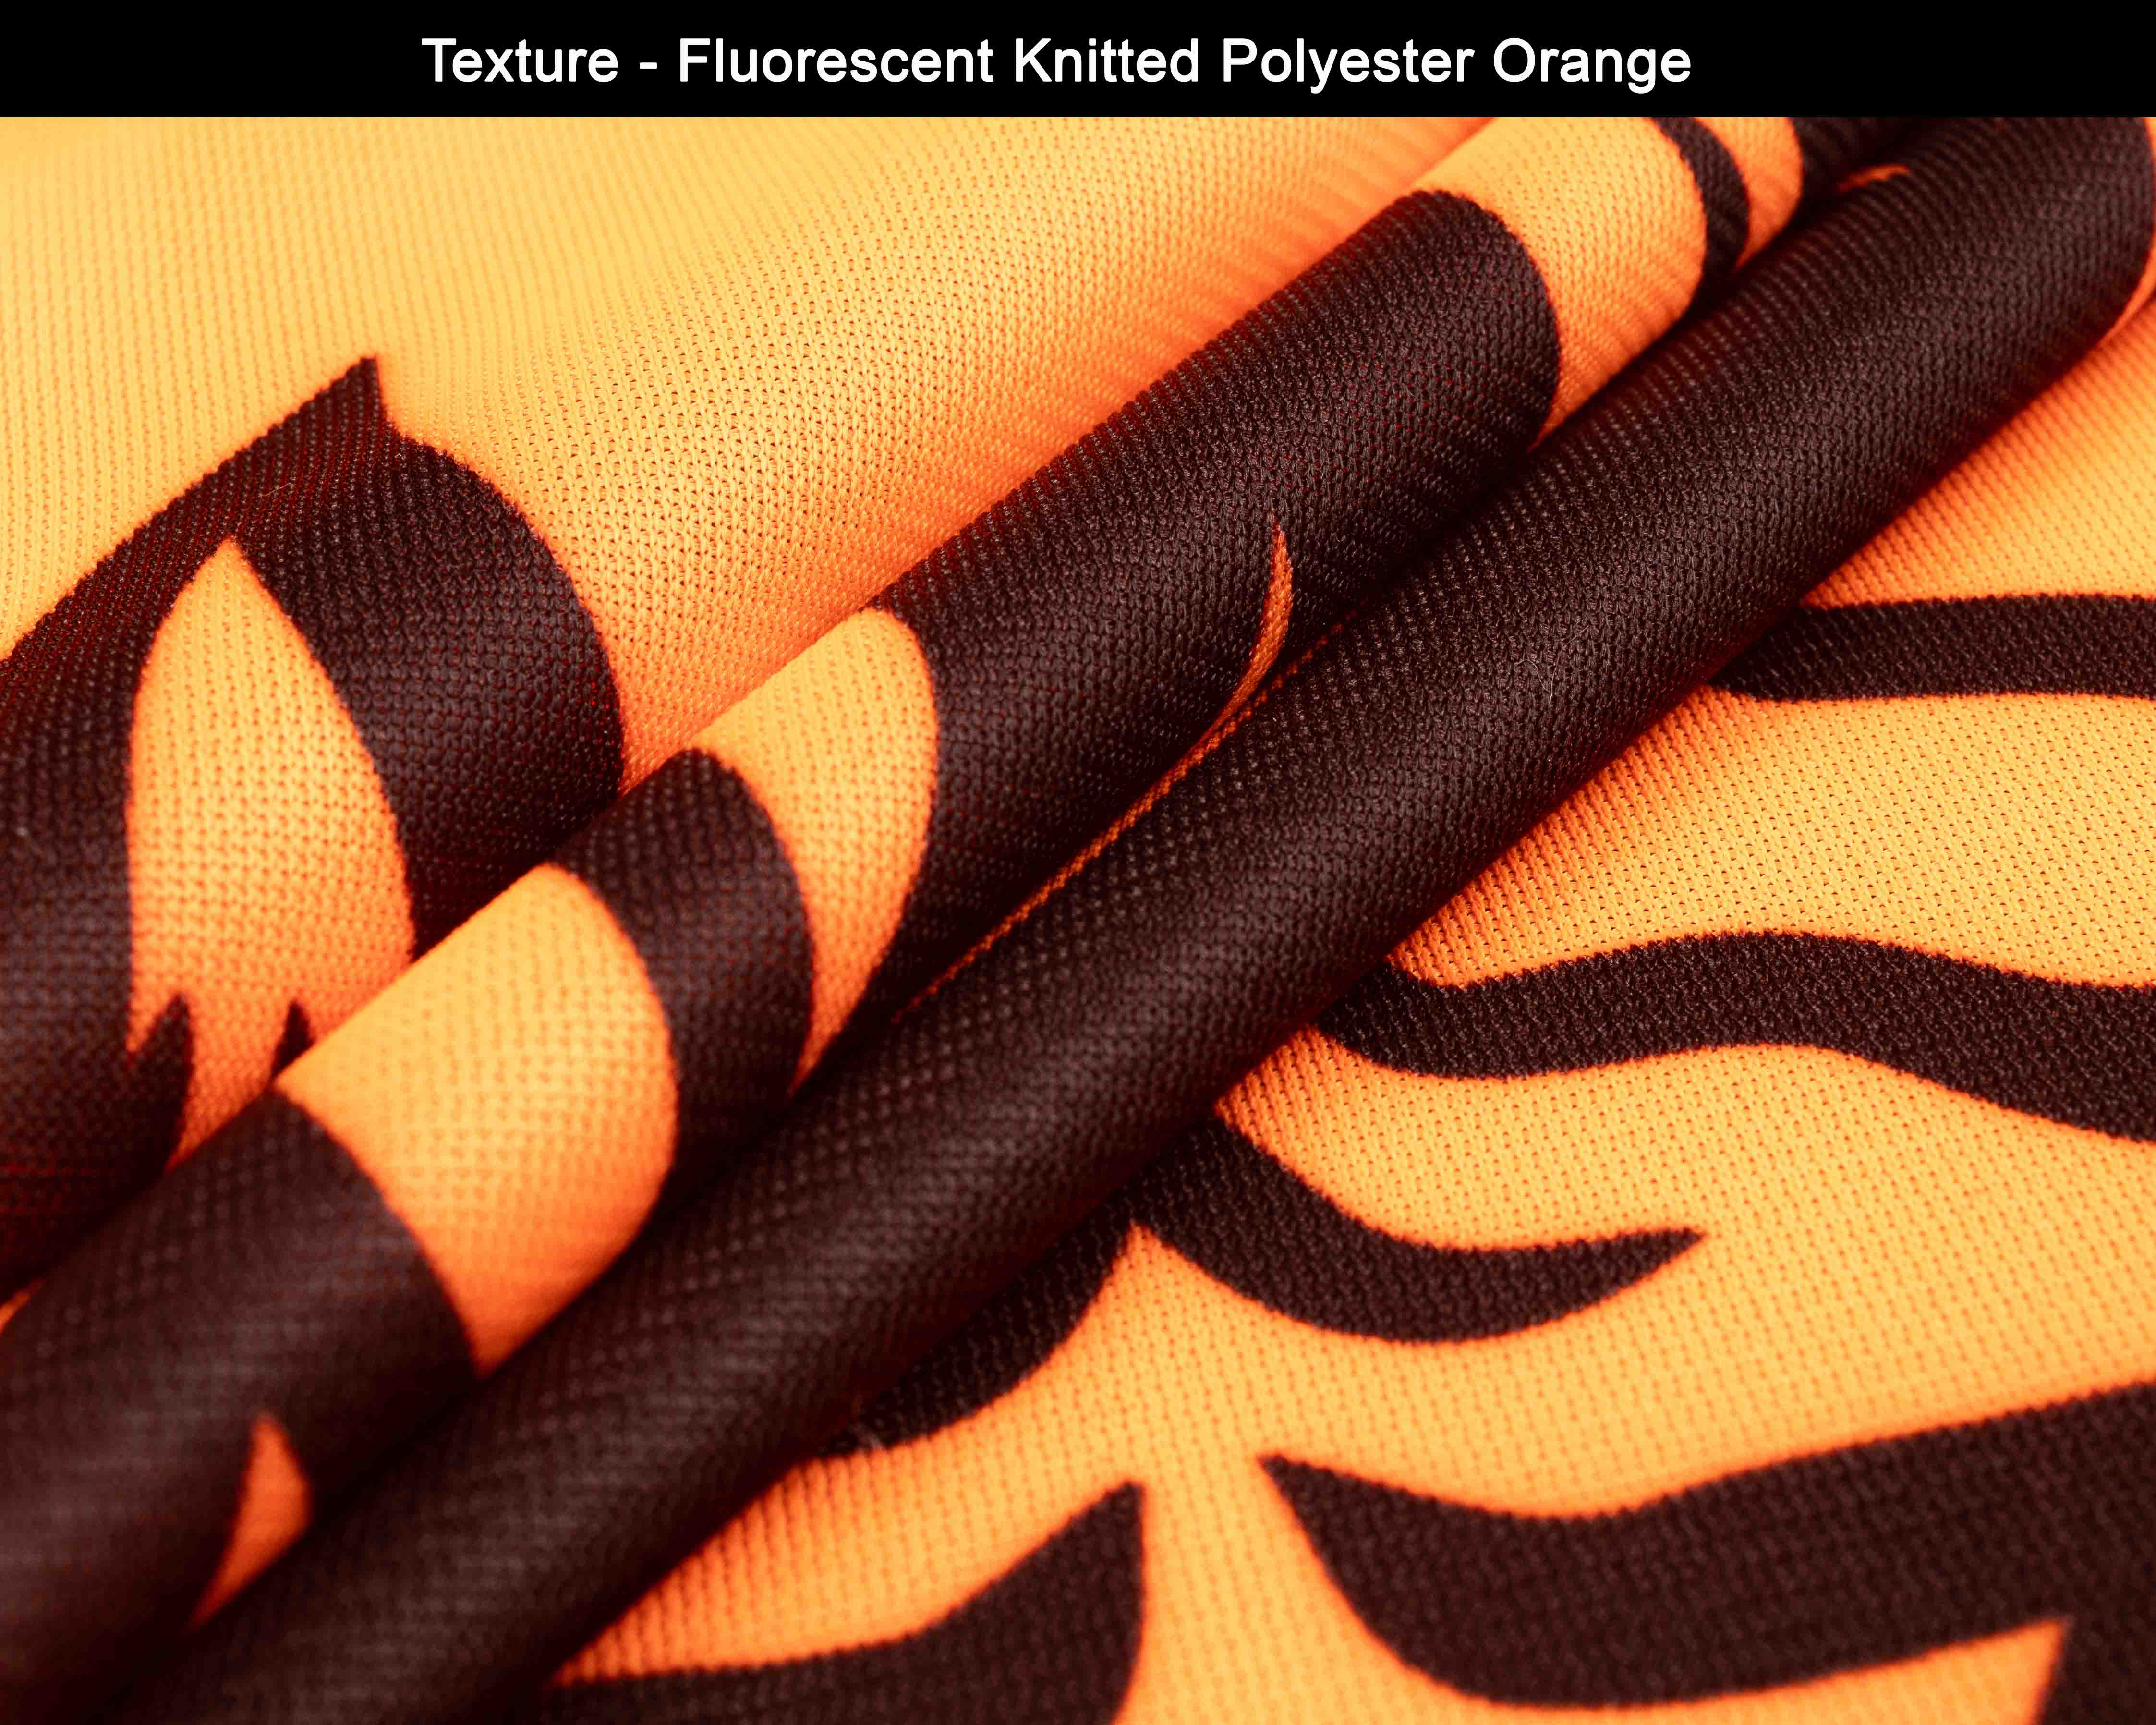 Fluorescent Knitted Polyester Fabric Printing